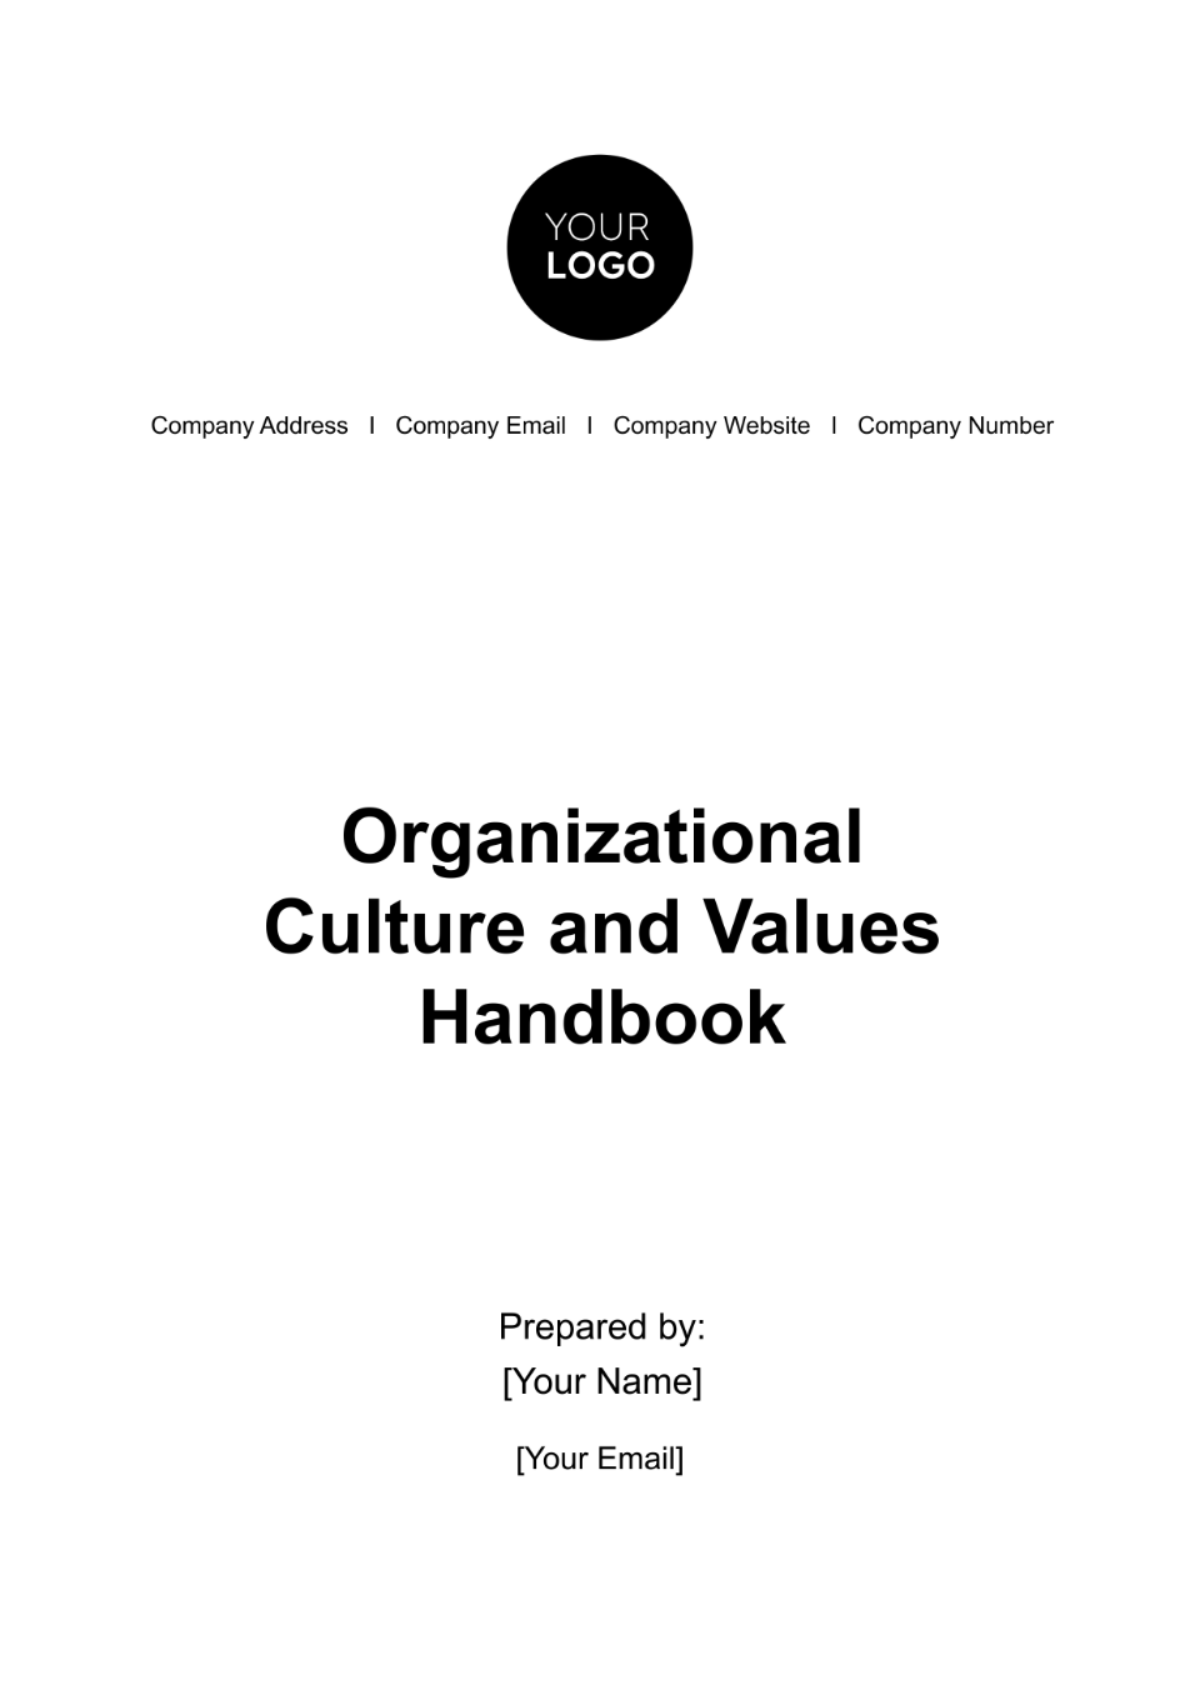 Free Organizational Culture and Values Handbook HR Template